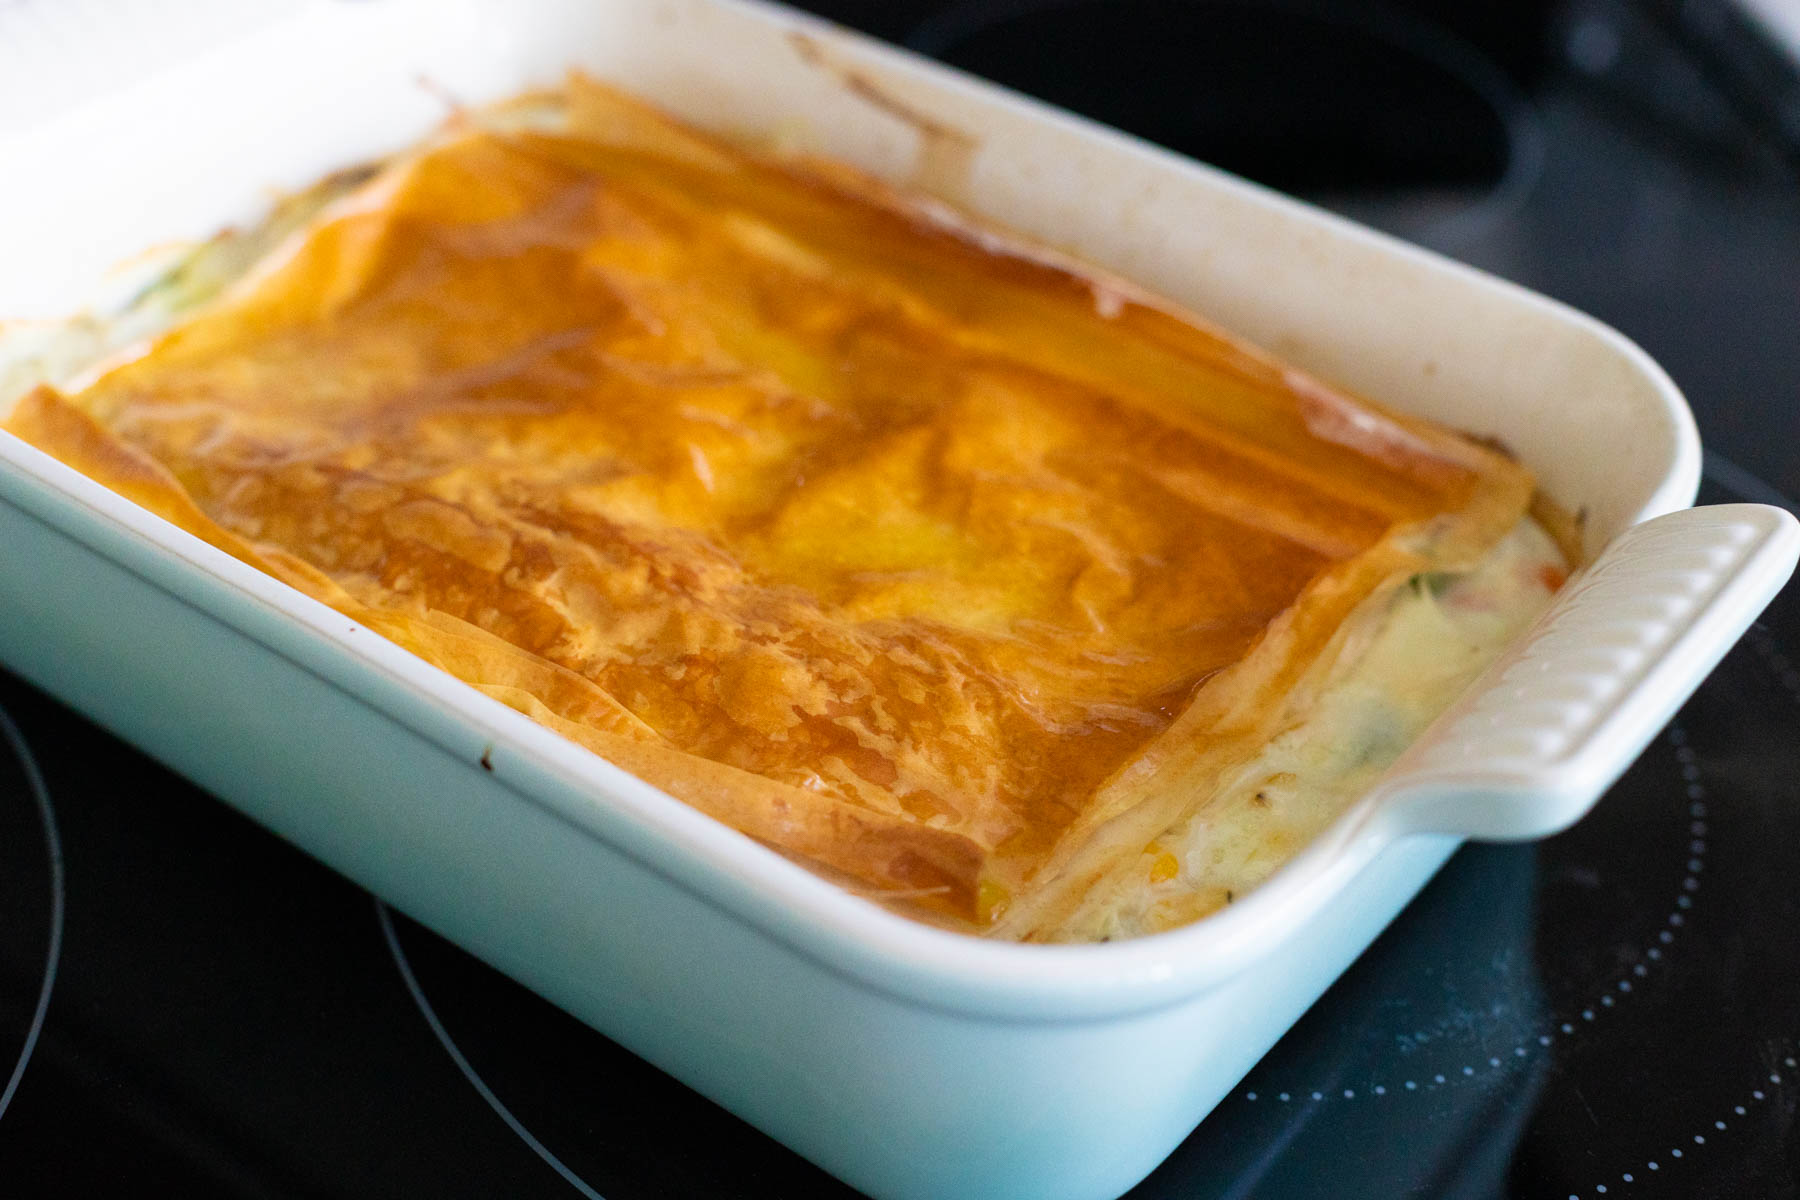 The golden brown phyllo dough is on top of the chicken pot pie fresh from the oven.